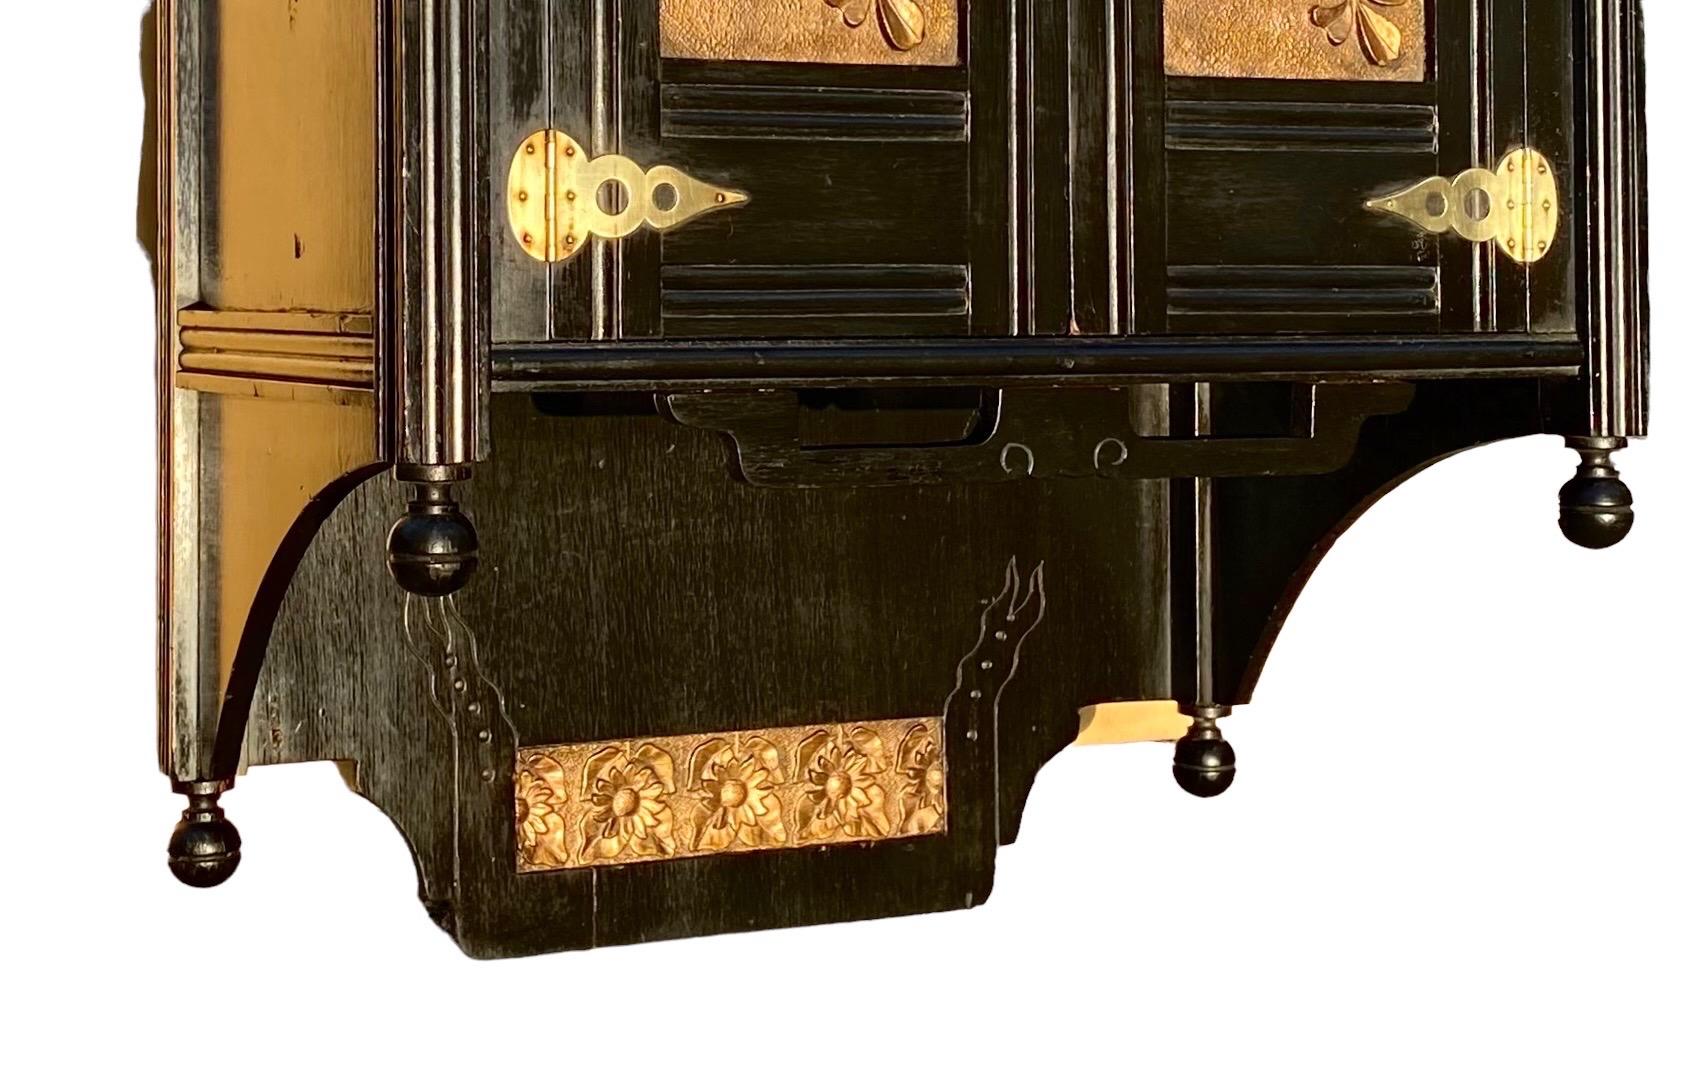 English Aesthetic Ebonized Wood and Brass Wall Cabinet, c. 1880, the finialed back splash with a relief brass floral plate, over a double door cupboard with brass floral relief panels, above a shaped shelf on a finialed bottom.

Wonderful to place